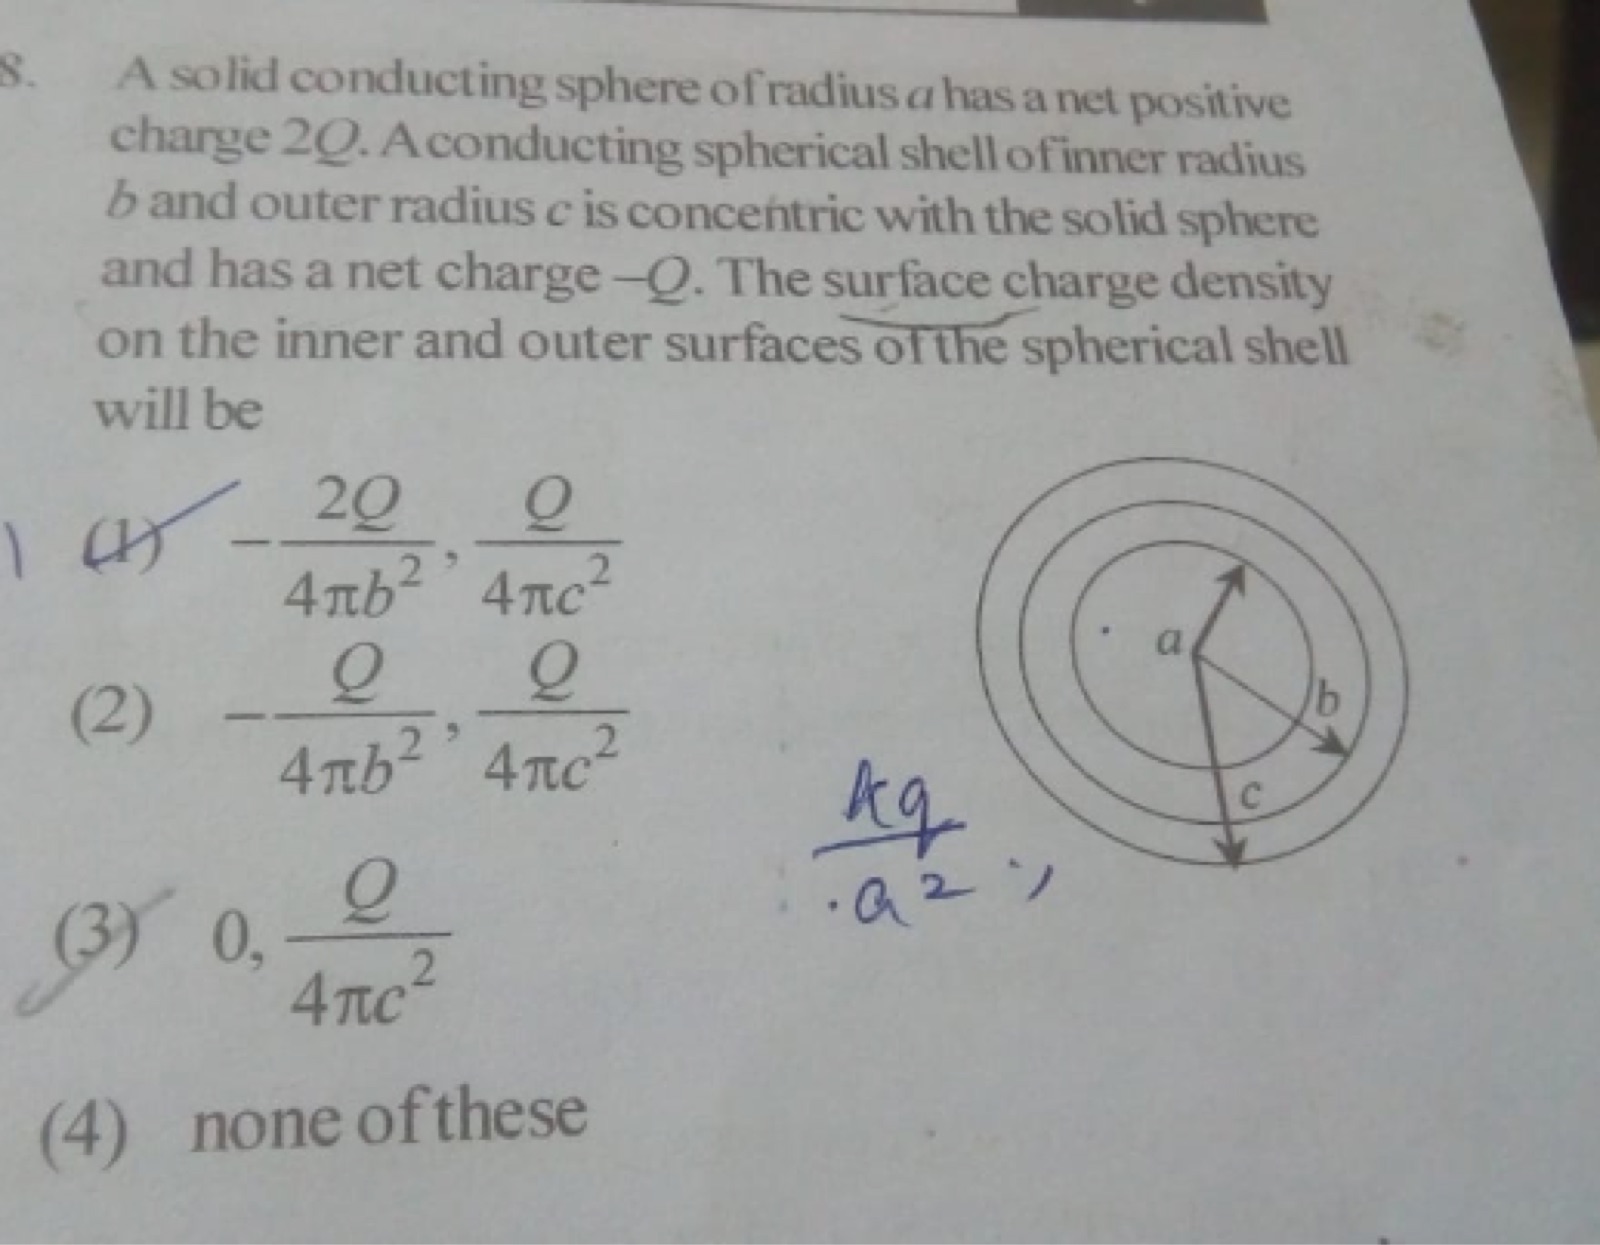 a solid conducting sphere of radius a